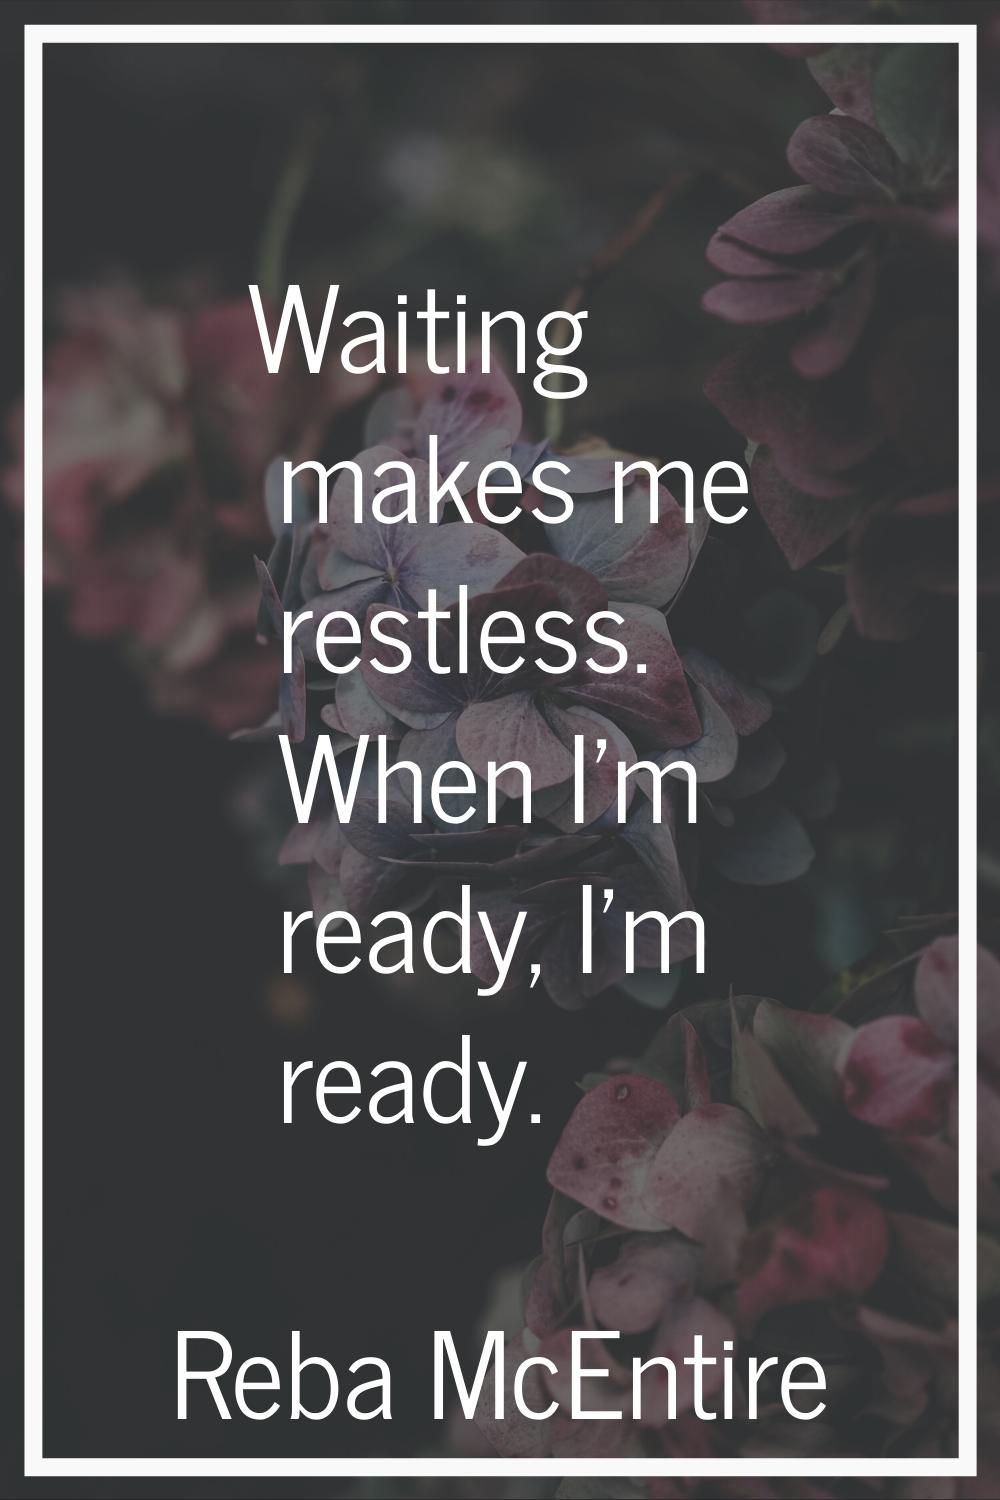 Waiting makes me restless. When I'm ready, I'm ready.